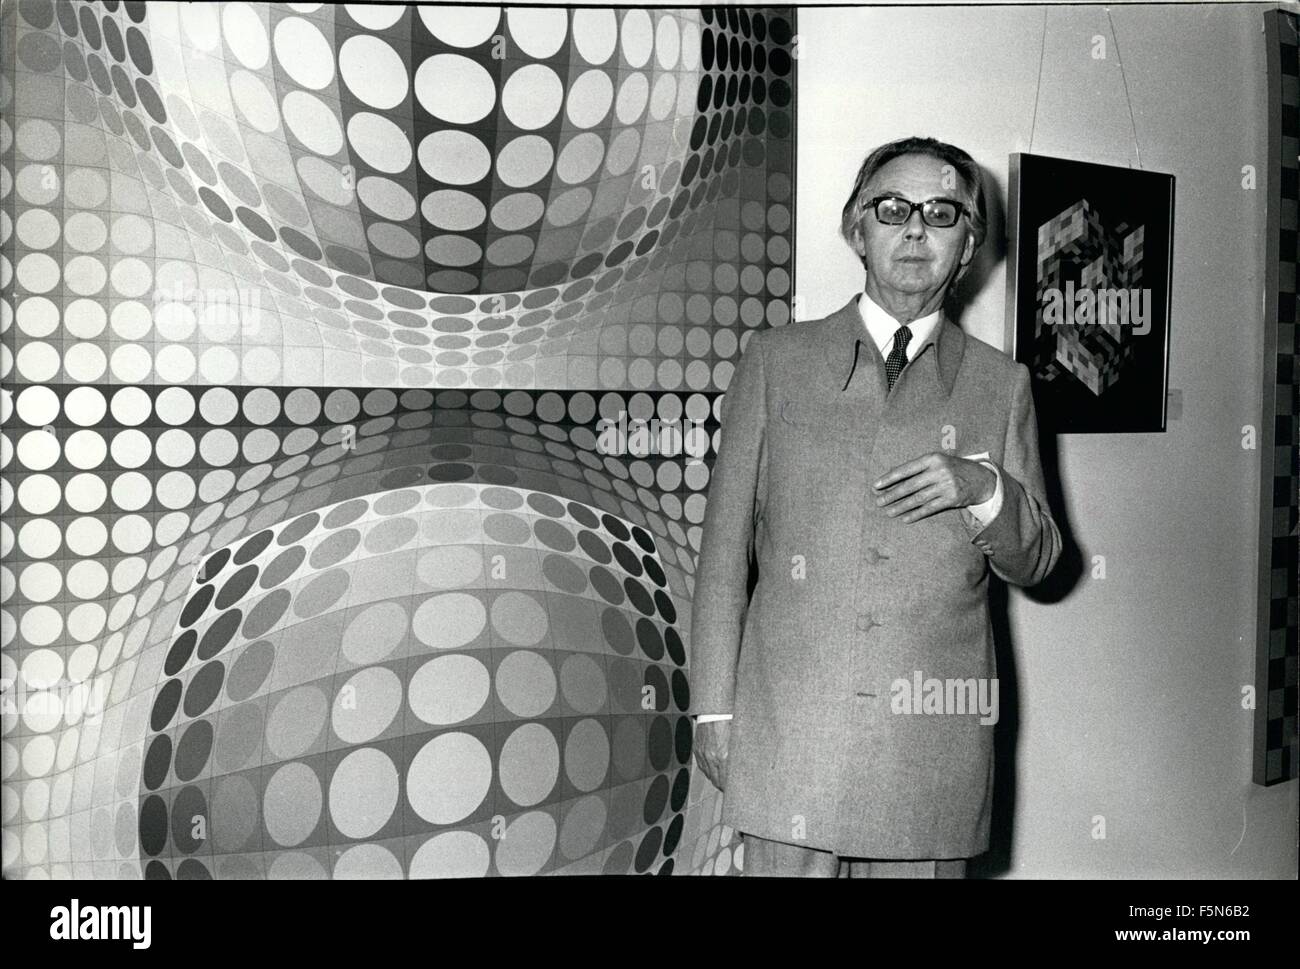 1978 - Inaugural Exhibit of the new Vasareley Center 1015 Madison Ave. NYC, 19 May 78. Painting, Collages and serigraphs by - Victor Vasarely, one of the world s foremost artists, was born in Hungary, and has lived in Paris since 1930. The father of Optical Art is represented world wide in major museums and collections. Among others, in the United States: Museum of Modern Art. New York, Solomon R. Guggenheim Art Museum. New York, Rockefeller Foundation. New York, Buffalo Museum, Pittsburg Museum of Art, Joseph Hirshorn Foundation, Jewish Museum. New York, Dallas Museum, Philadelphia Museum. In Stock Photo